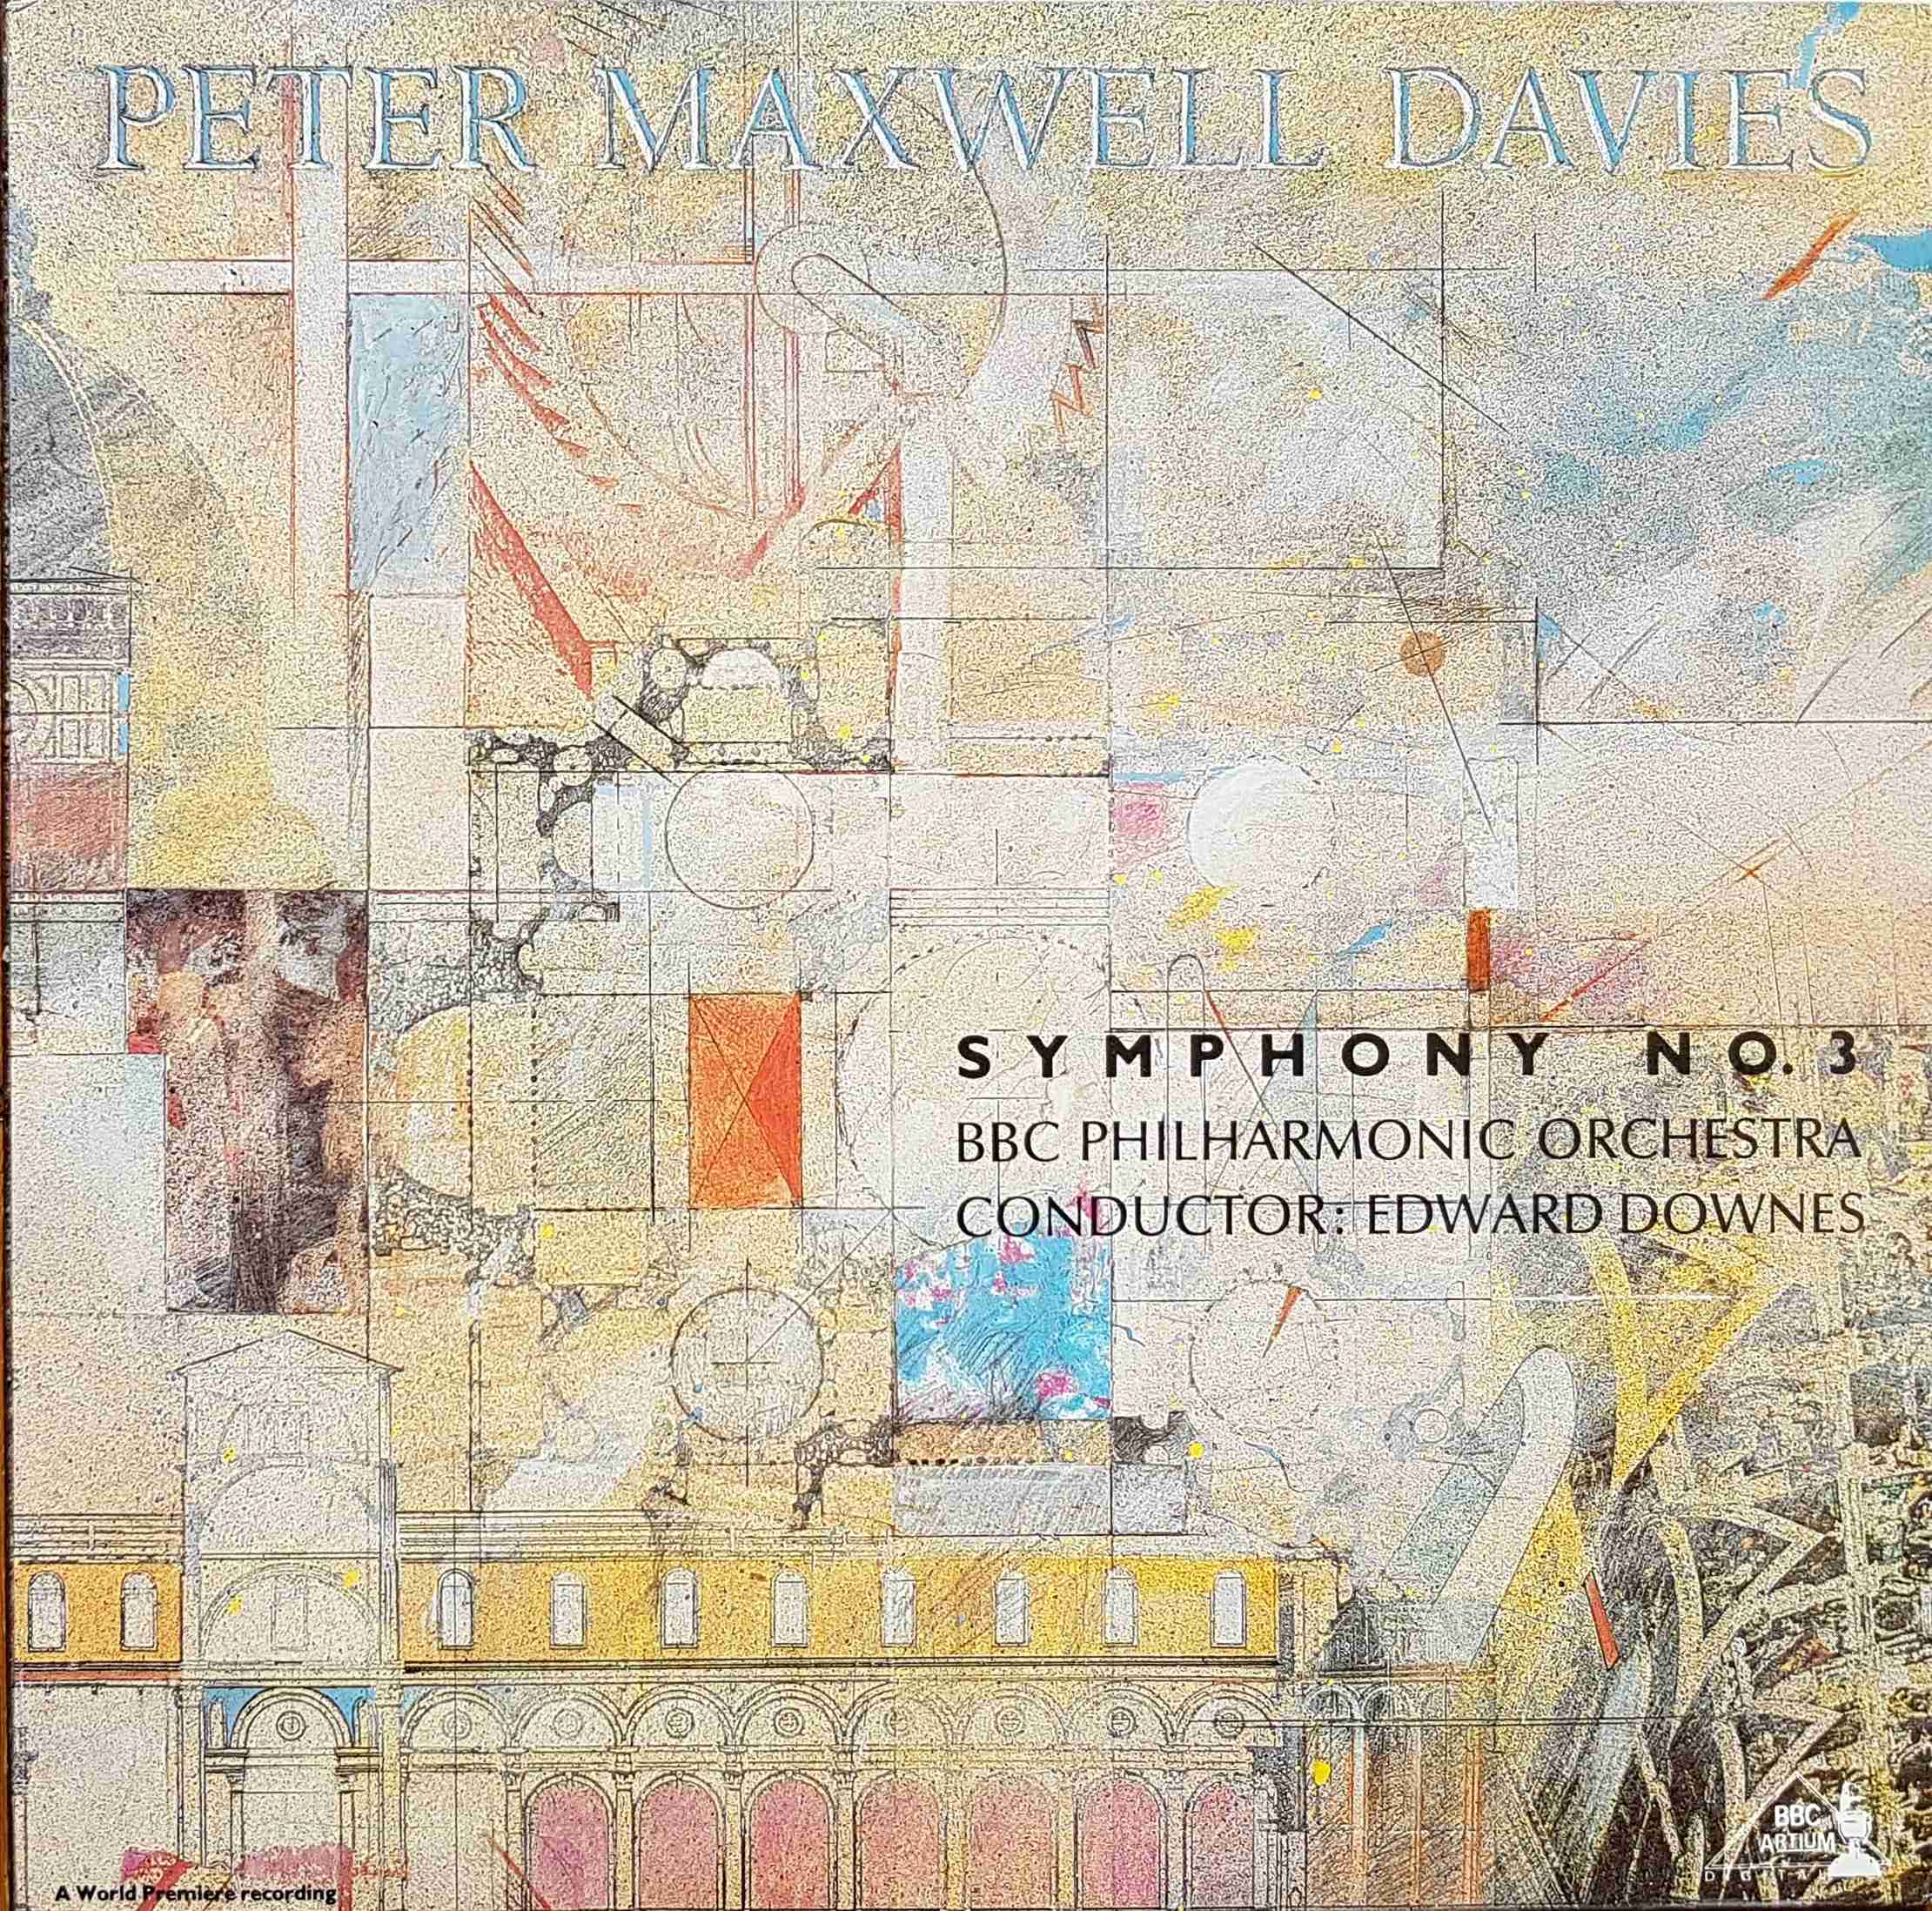 Picture of REGL 560 Peter Maxwell Davies - Symphony no. 3 by artist Peter Maxwell Davies from the BBC albums - Records and Tapes library